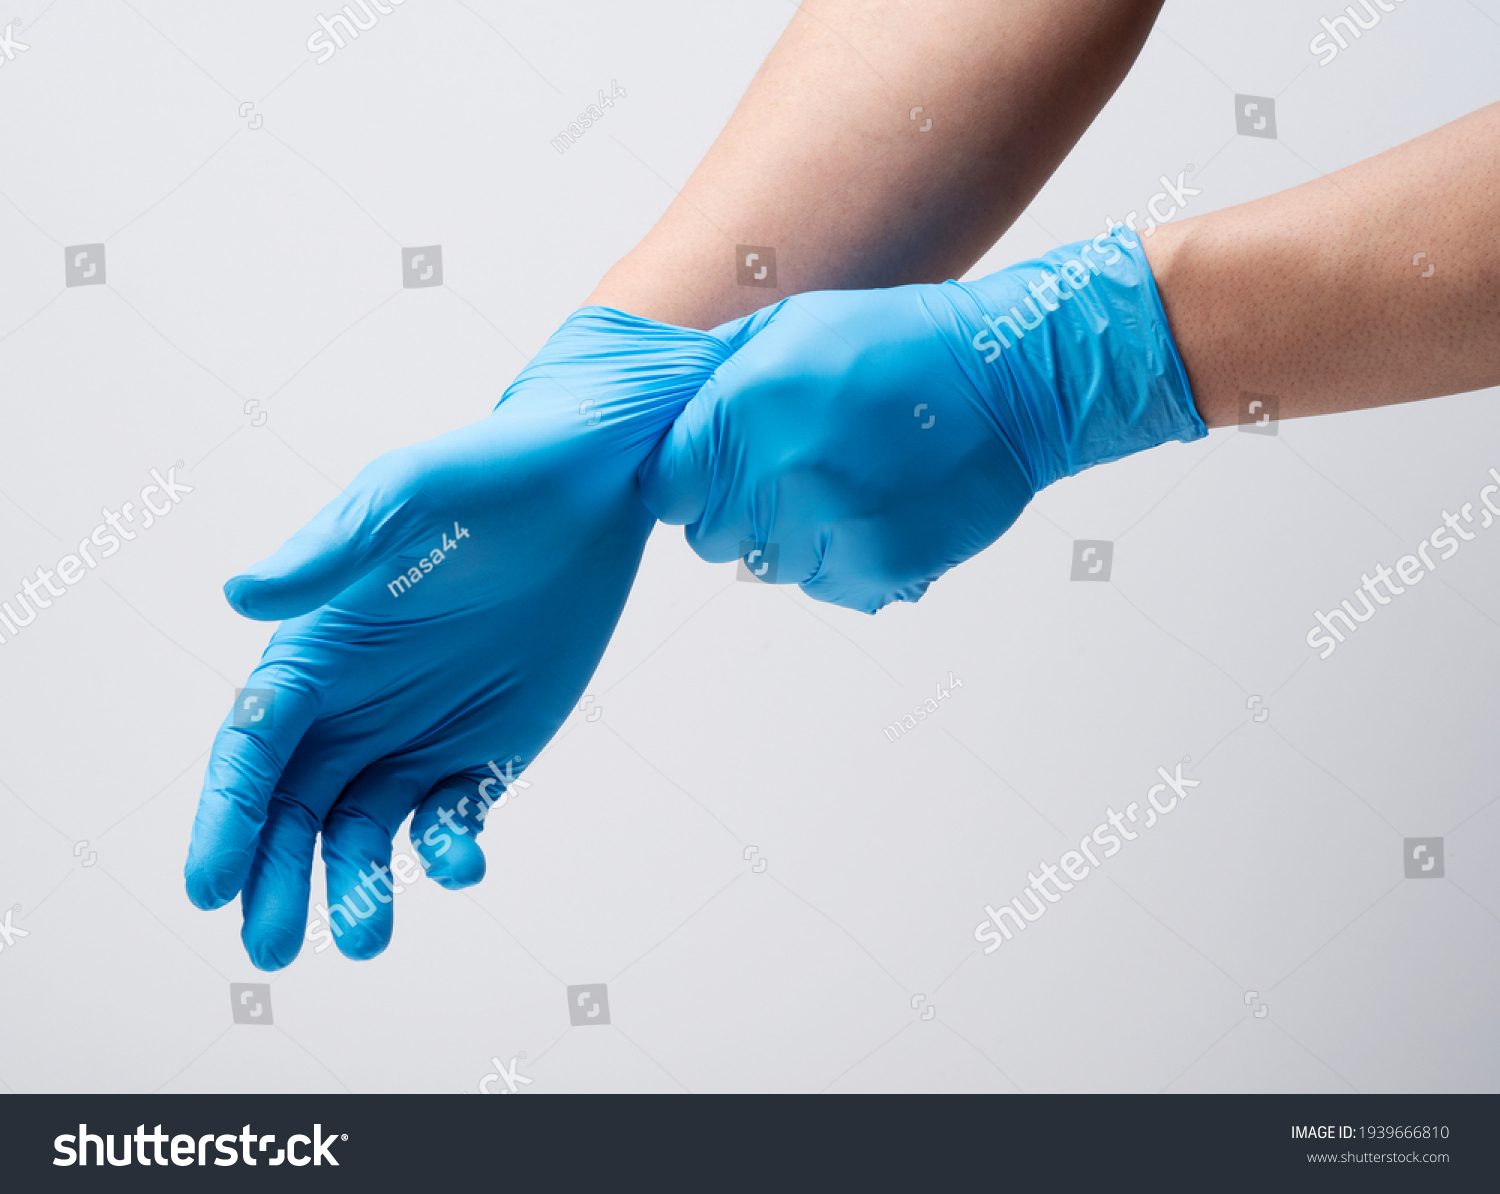 Two hands of a man wearing nitrile gloves on a white background #1939666810